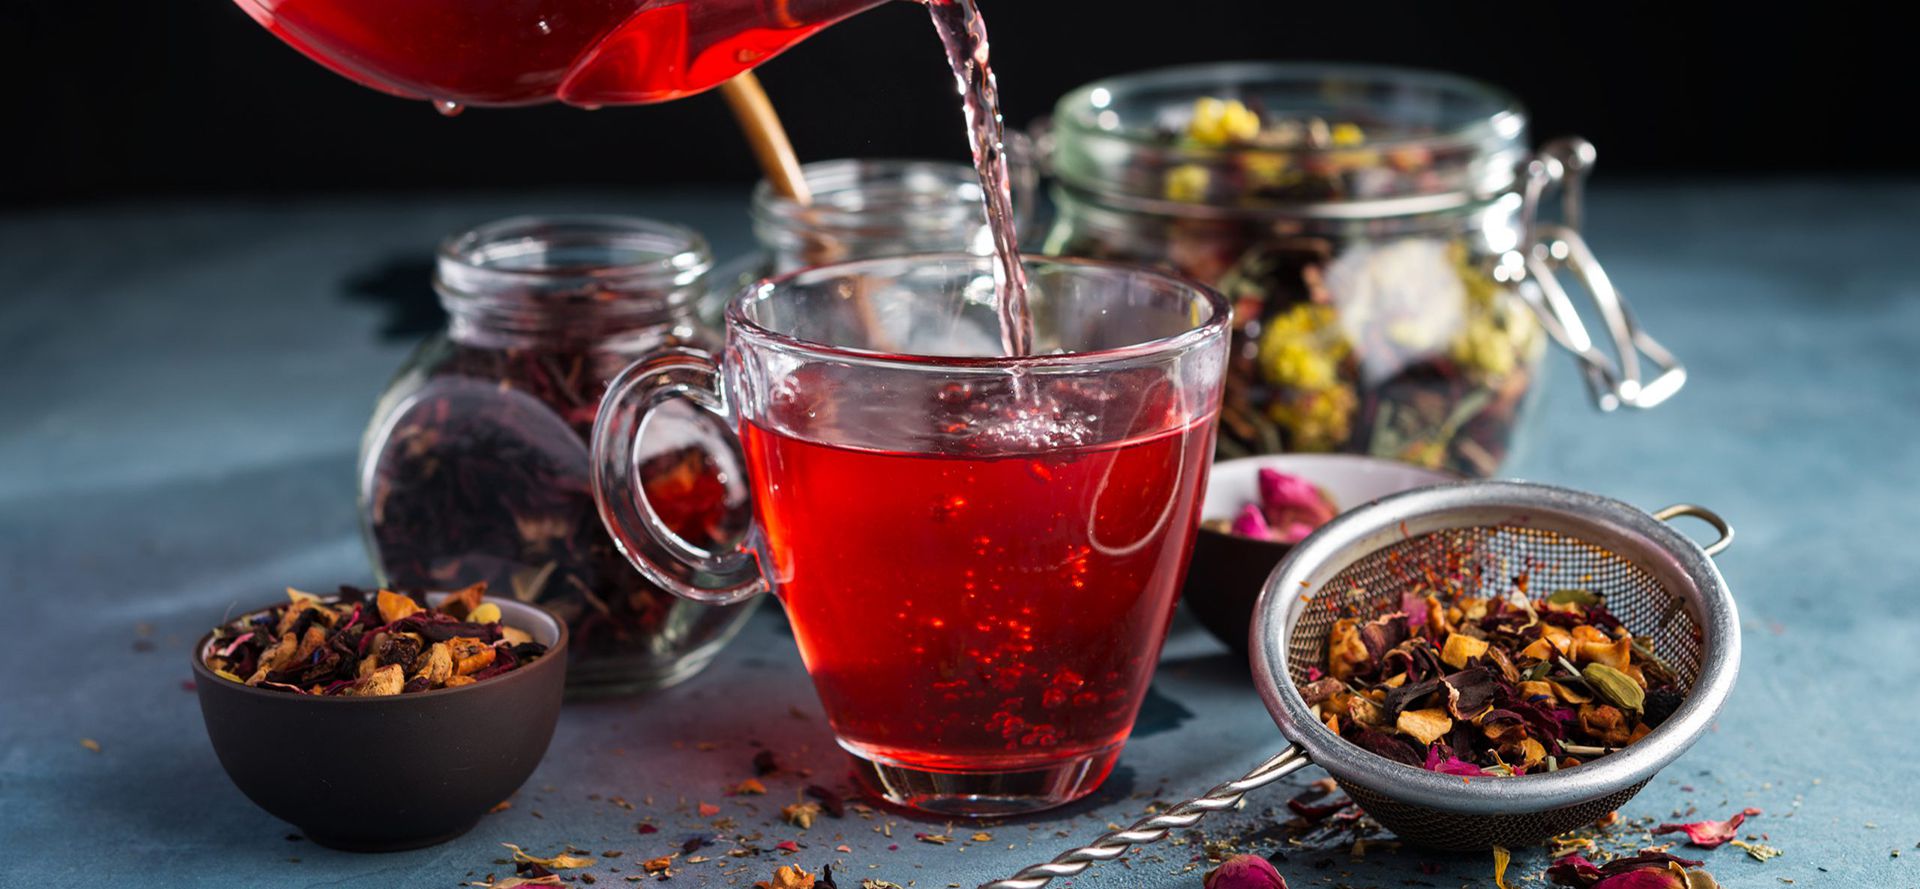 A Cup Of Hibiscus Tea.